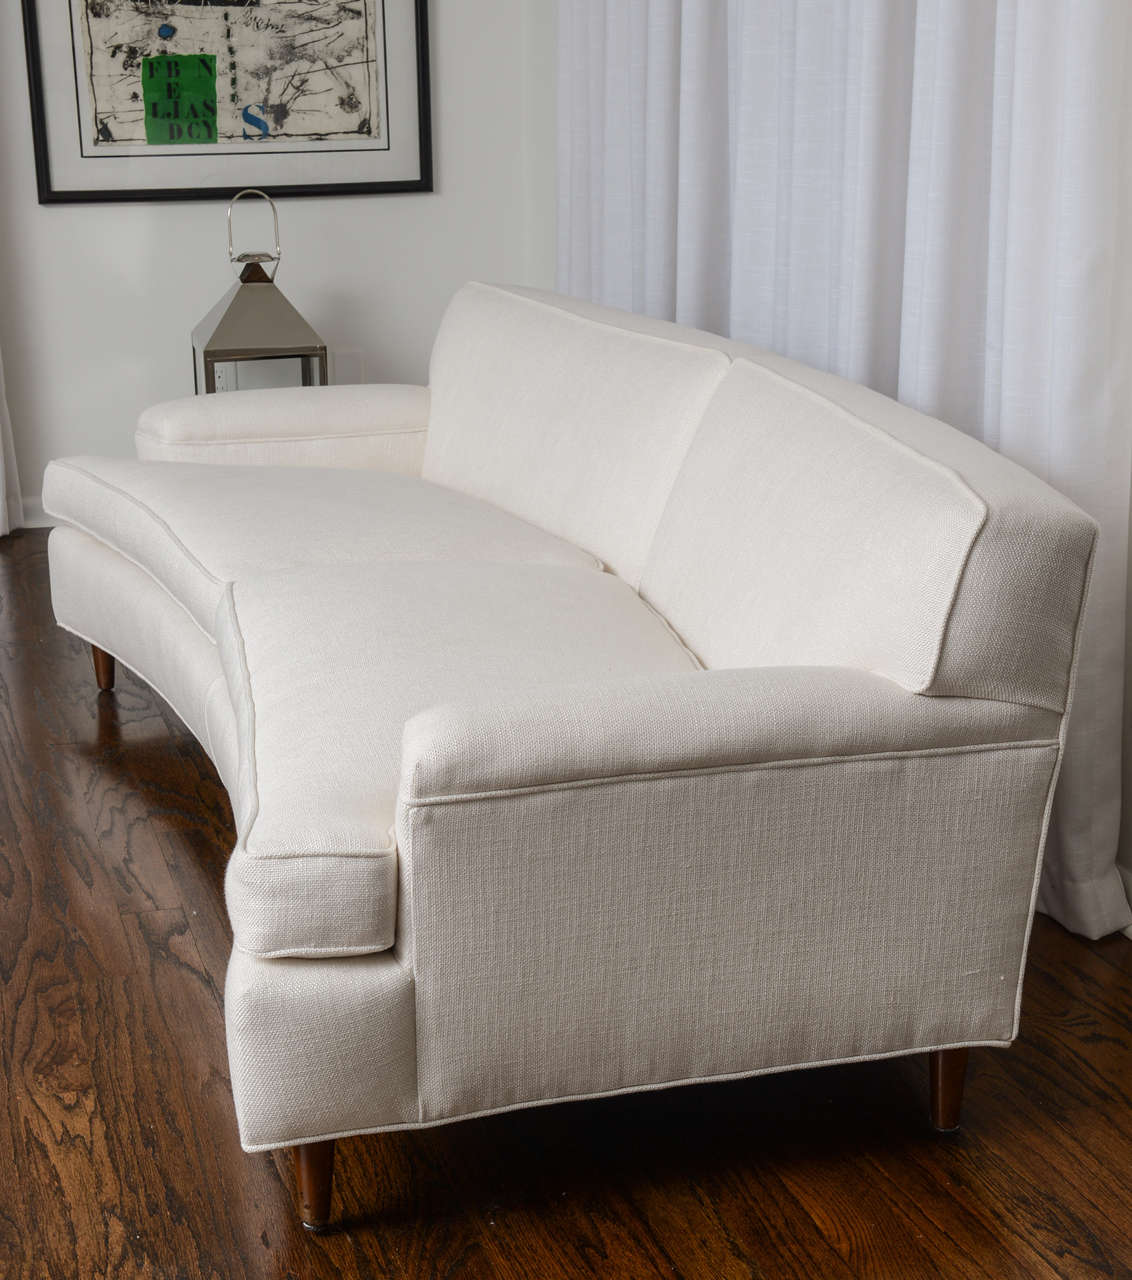 How to Choose a White Curved Sofa